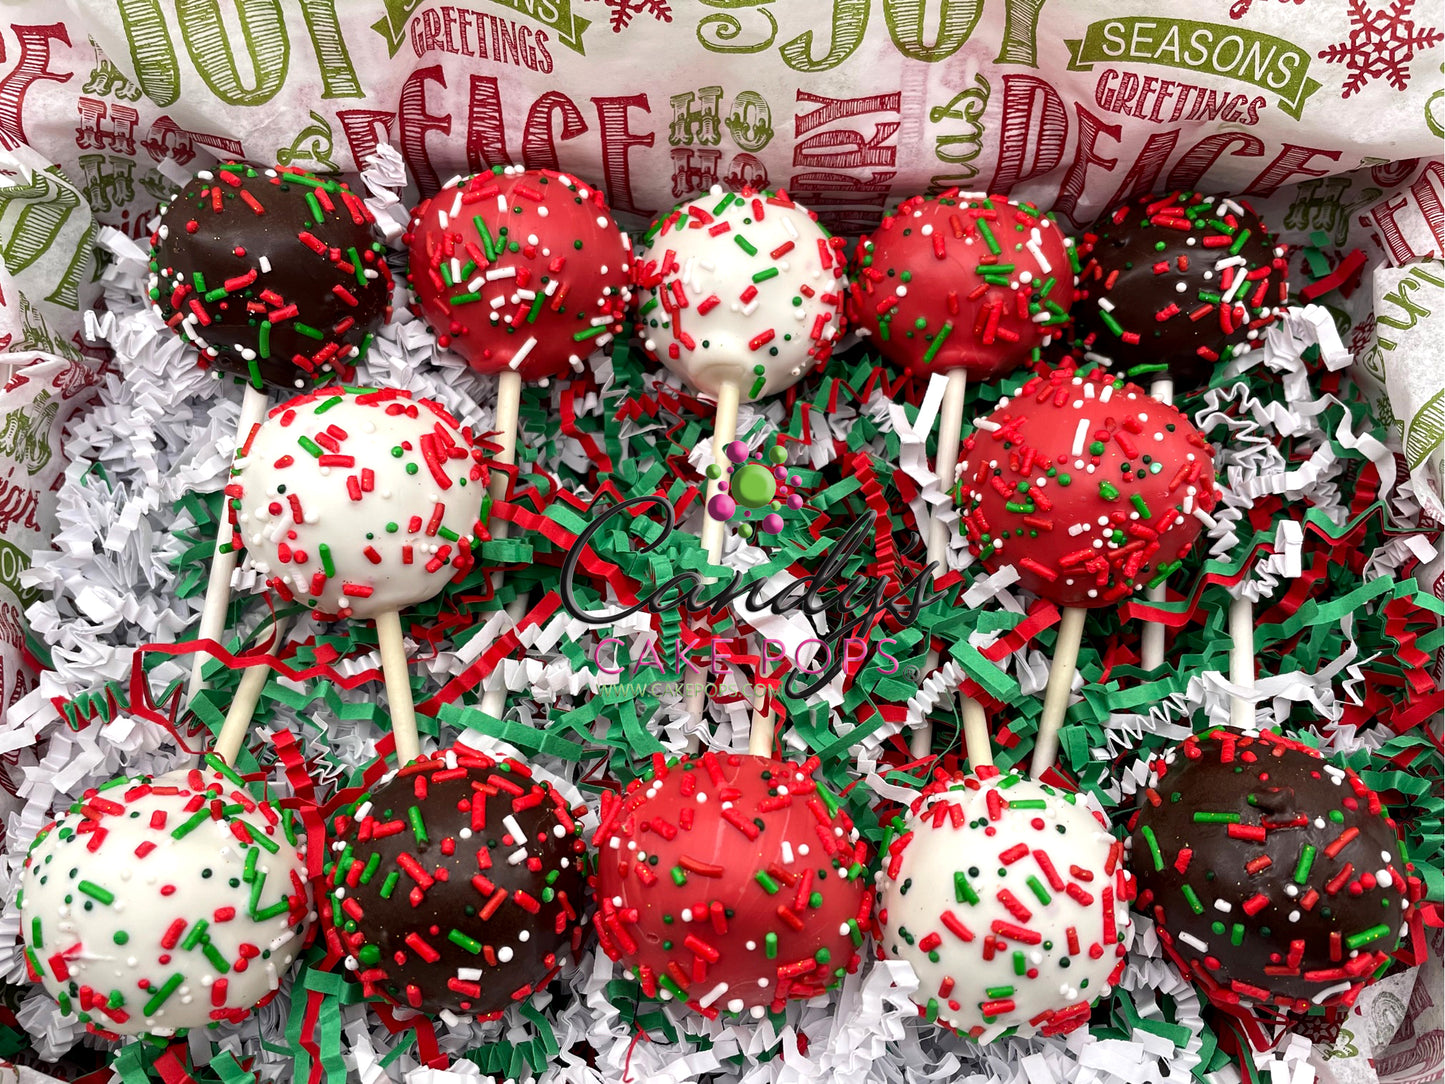 Merry Christmas Cake Pop Gift Box - Candy's Cake Pops